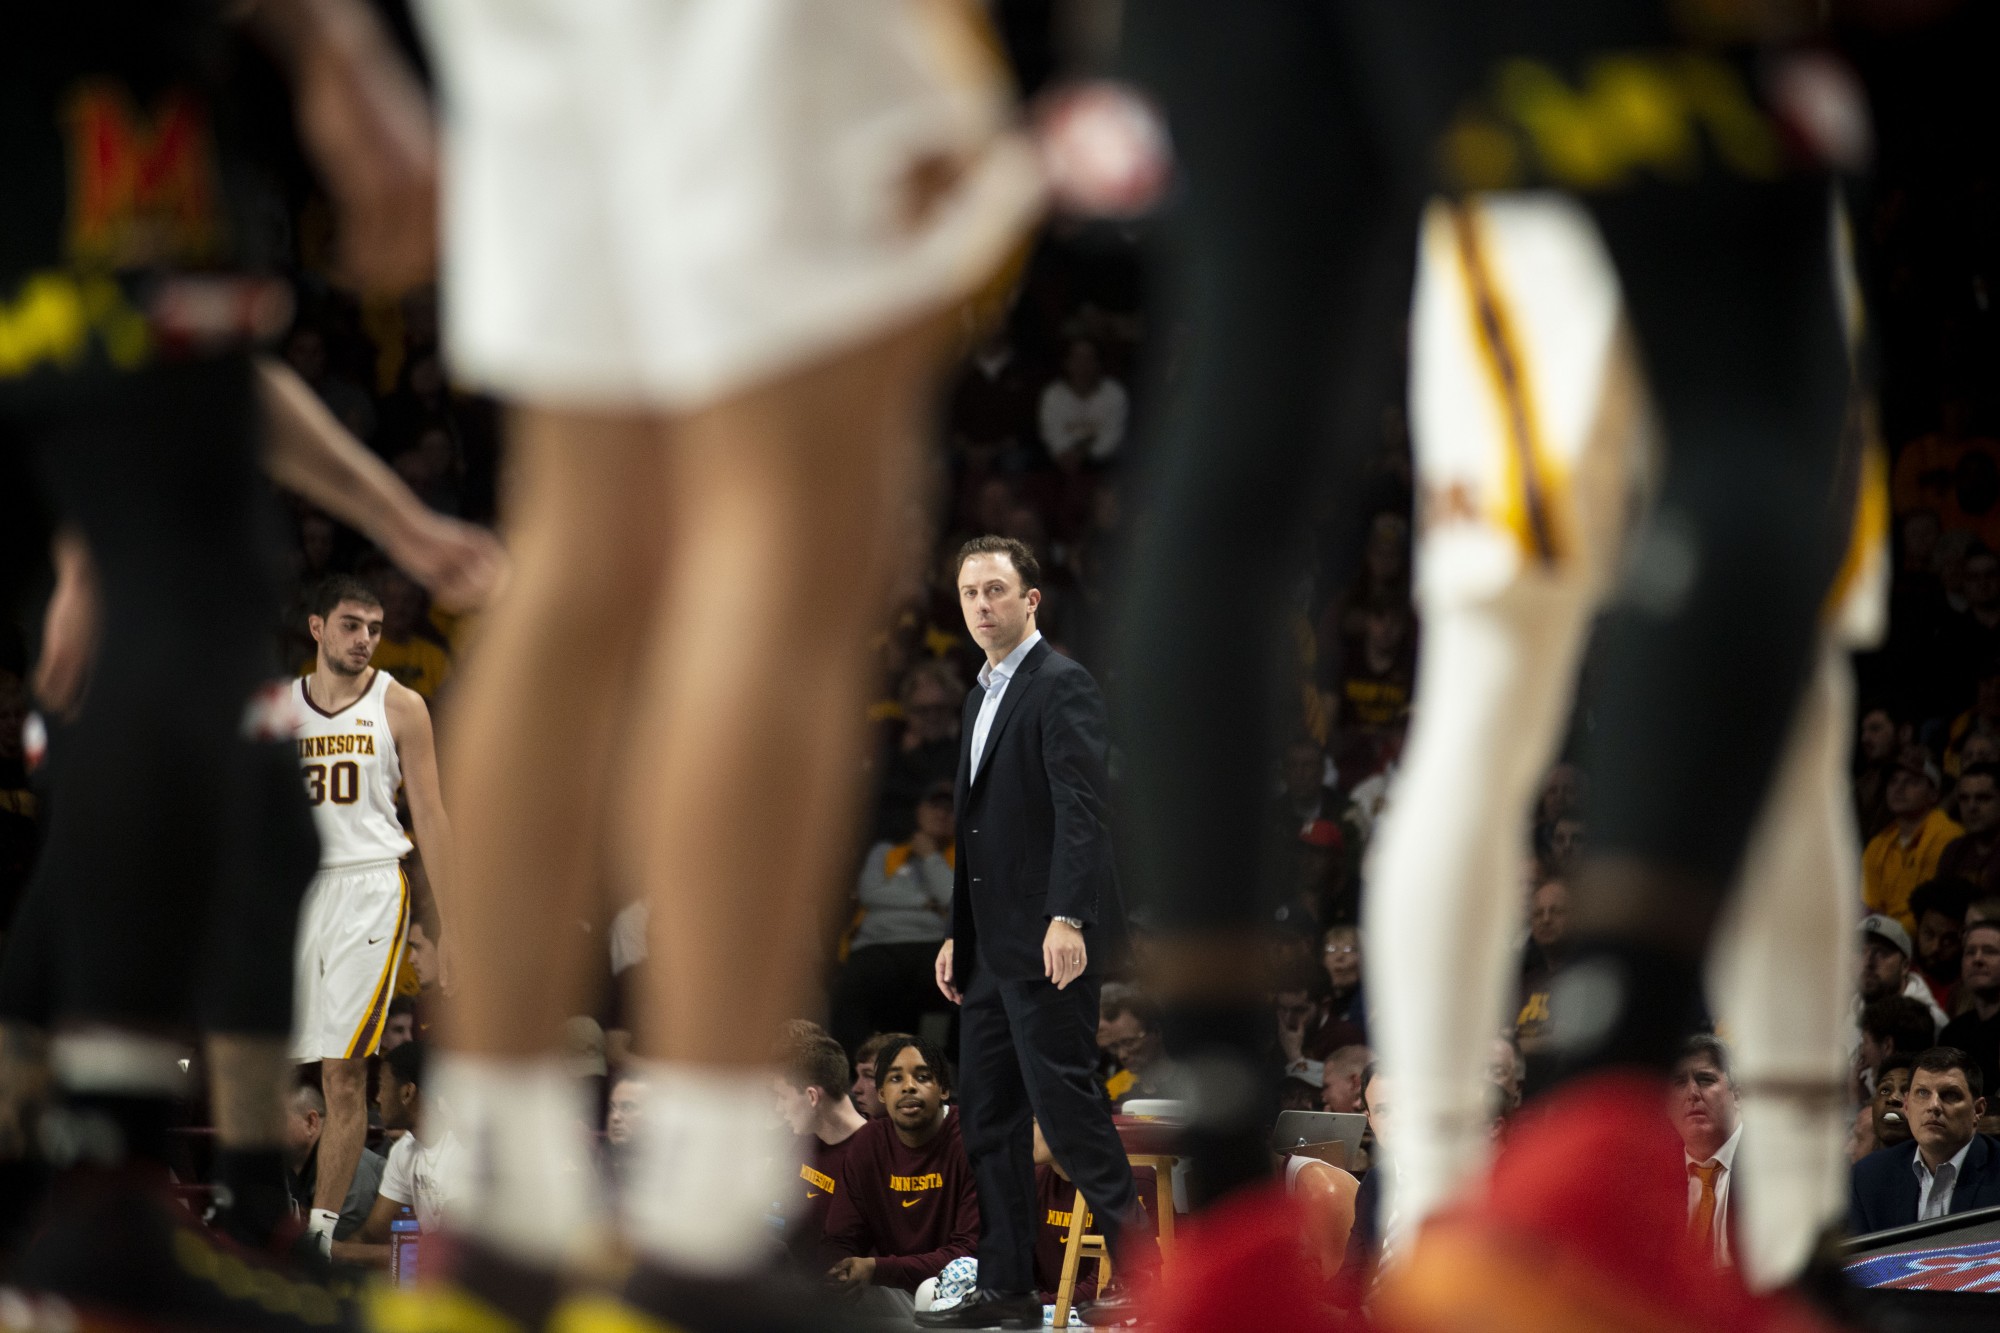 Gophers Head Coach Richard Pitino looks on from the sidelines during a free throw attempt at Williams Arena on Wednesday, Feb. 26. The Gophers entered the second half with a 47-31 lead over the Maryland Terrapins.